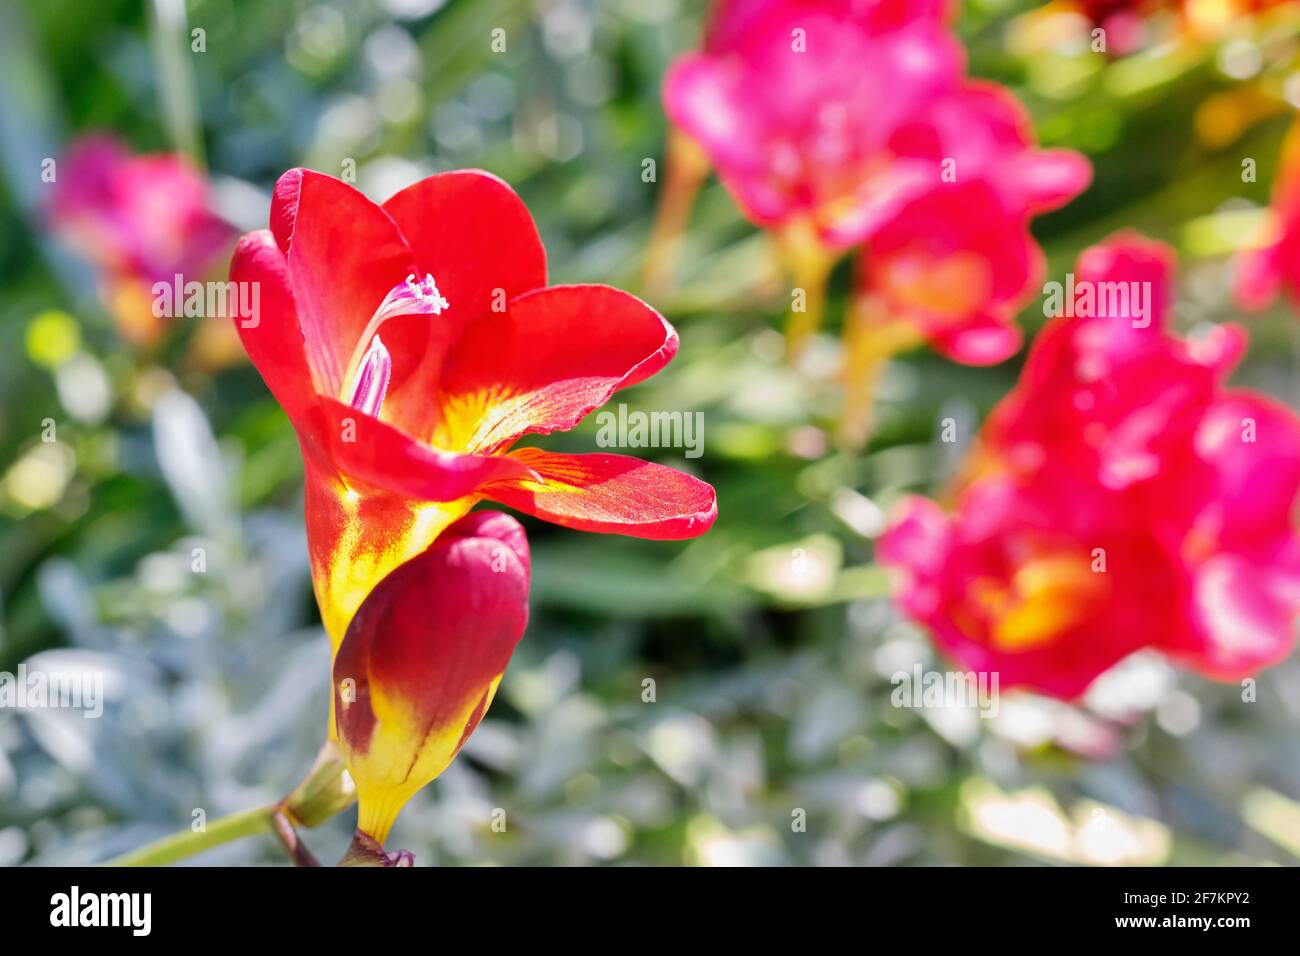 Red flowers of freesia , fragrant funnel shaped flowers in a bright  sunny day Stock Photo